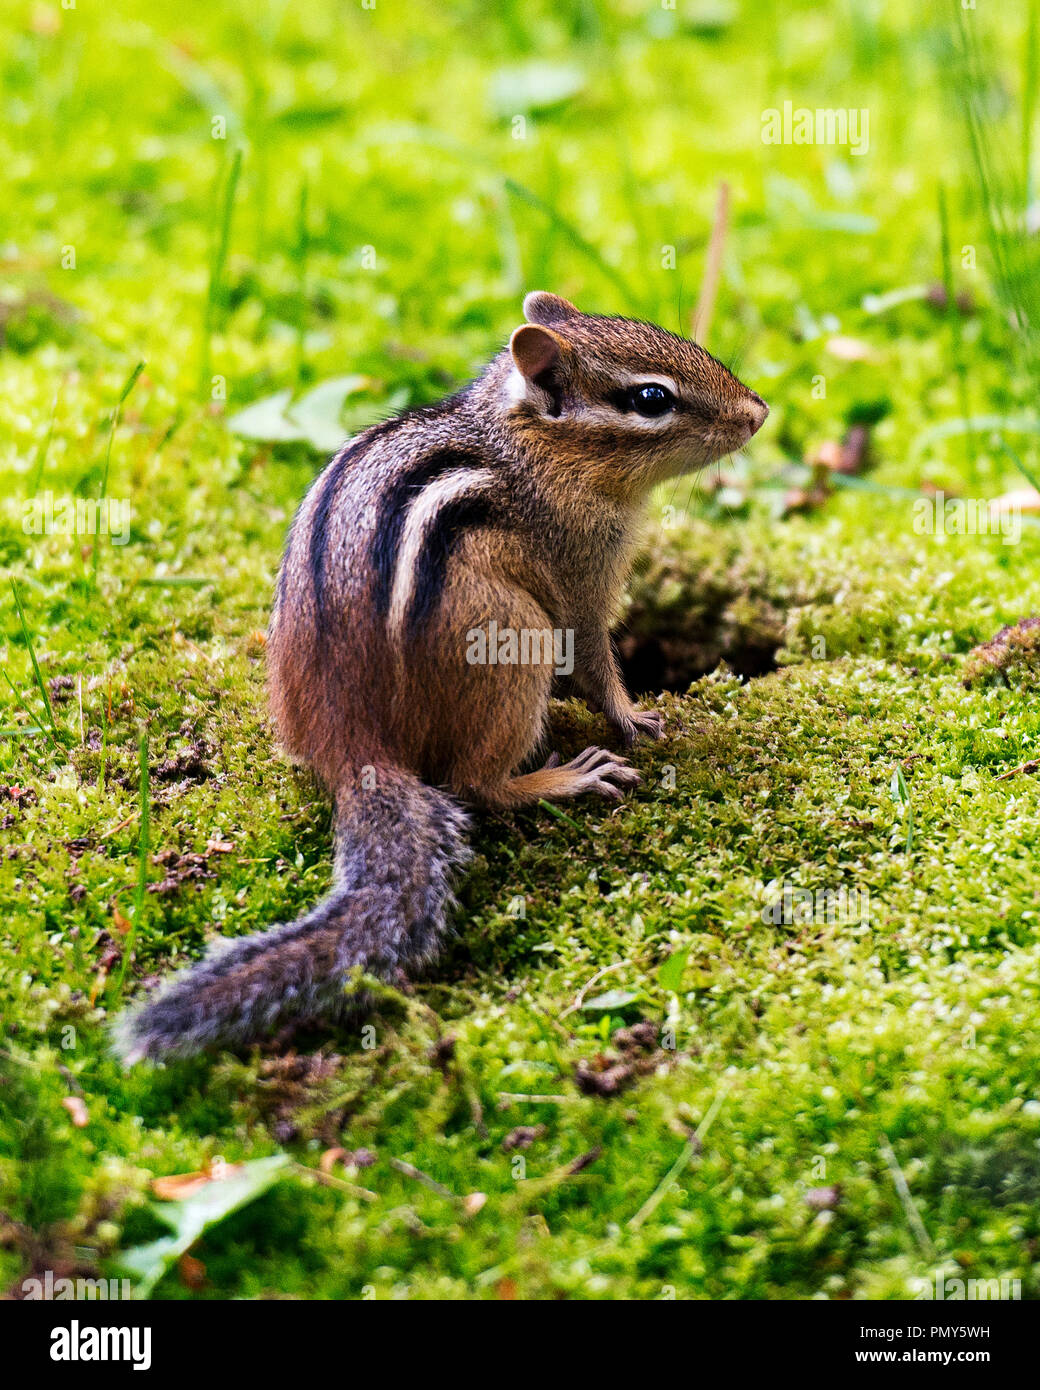 Chipmunk baby at the entrance of its burrow hole with green grass ground displaying brown fur, tail, head, eye, ears in its environment . Stock Photo